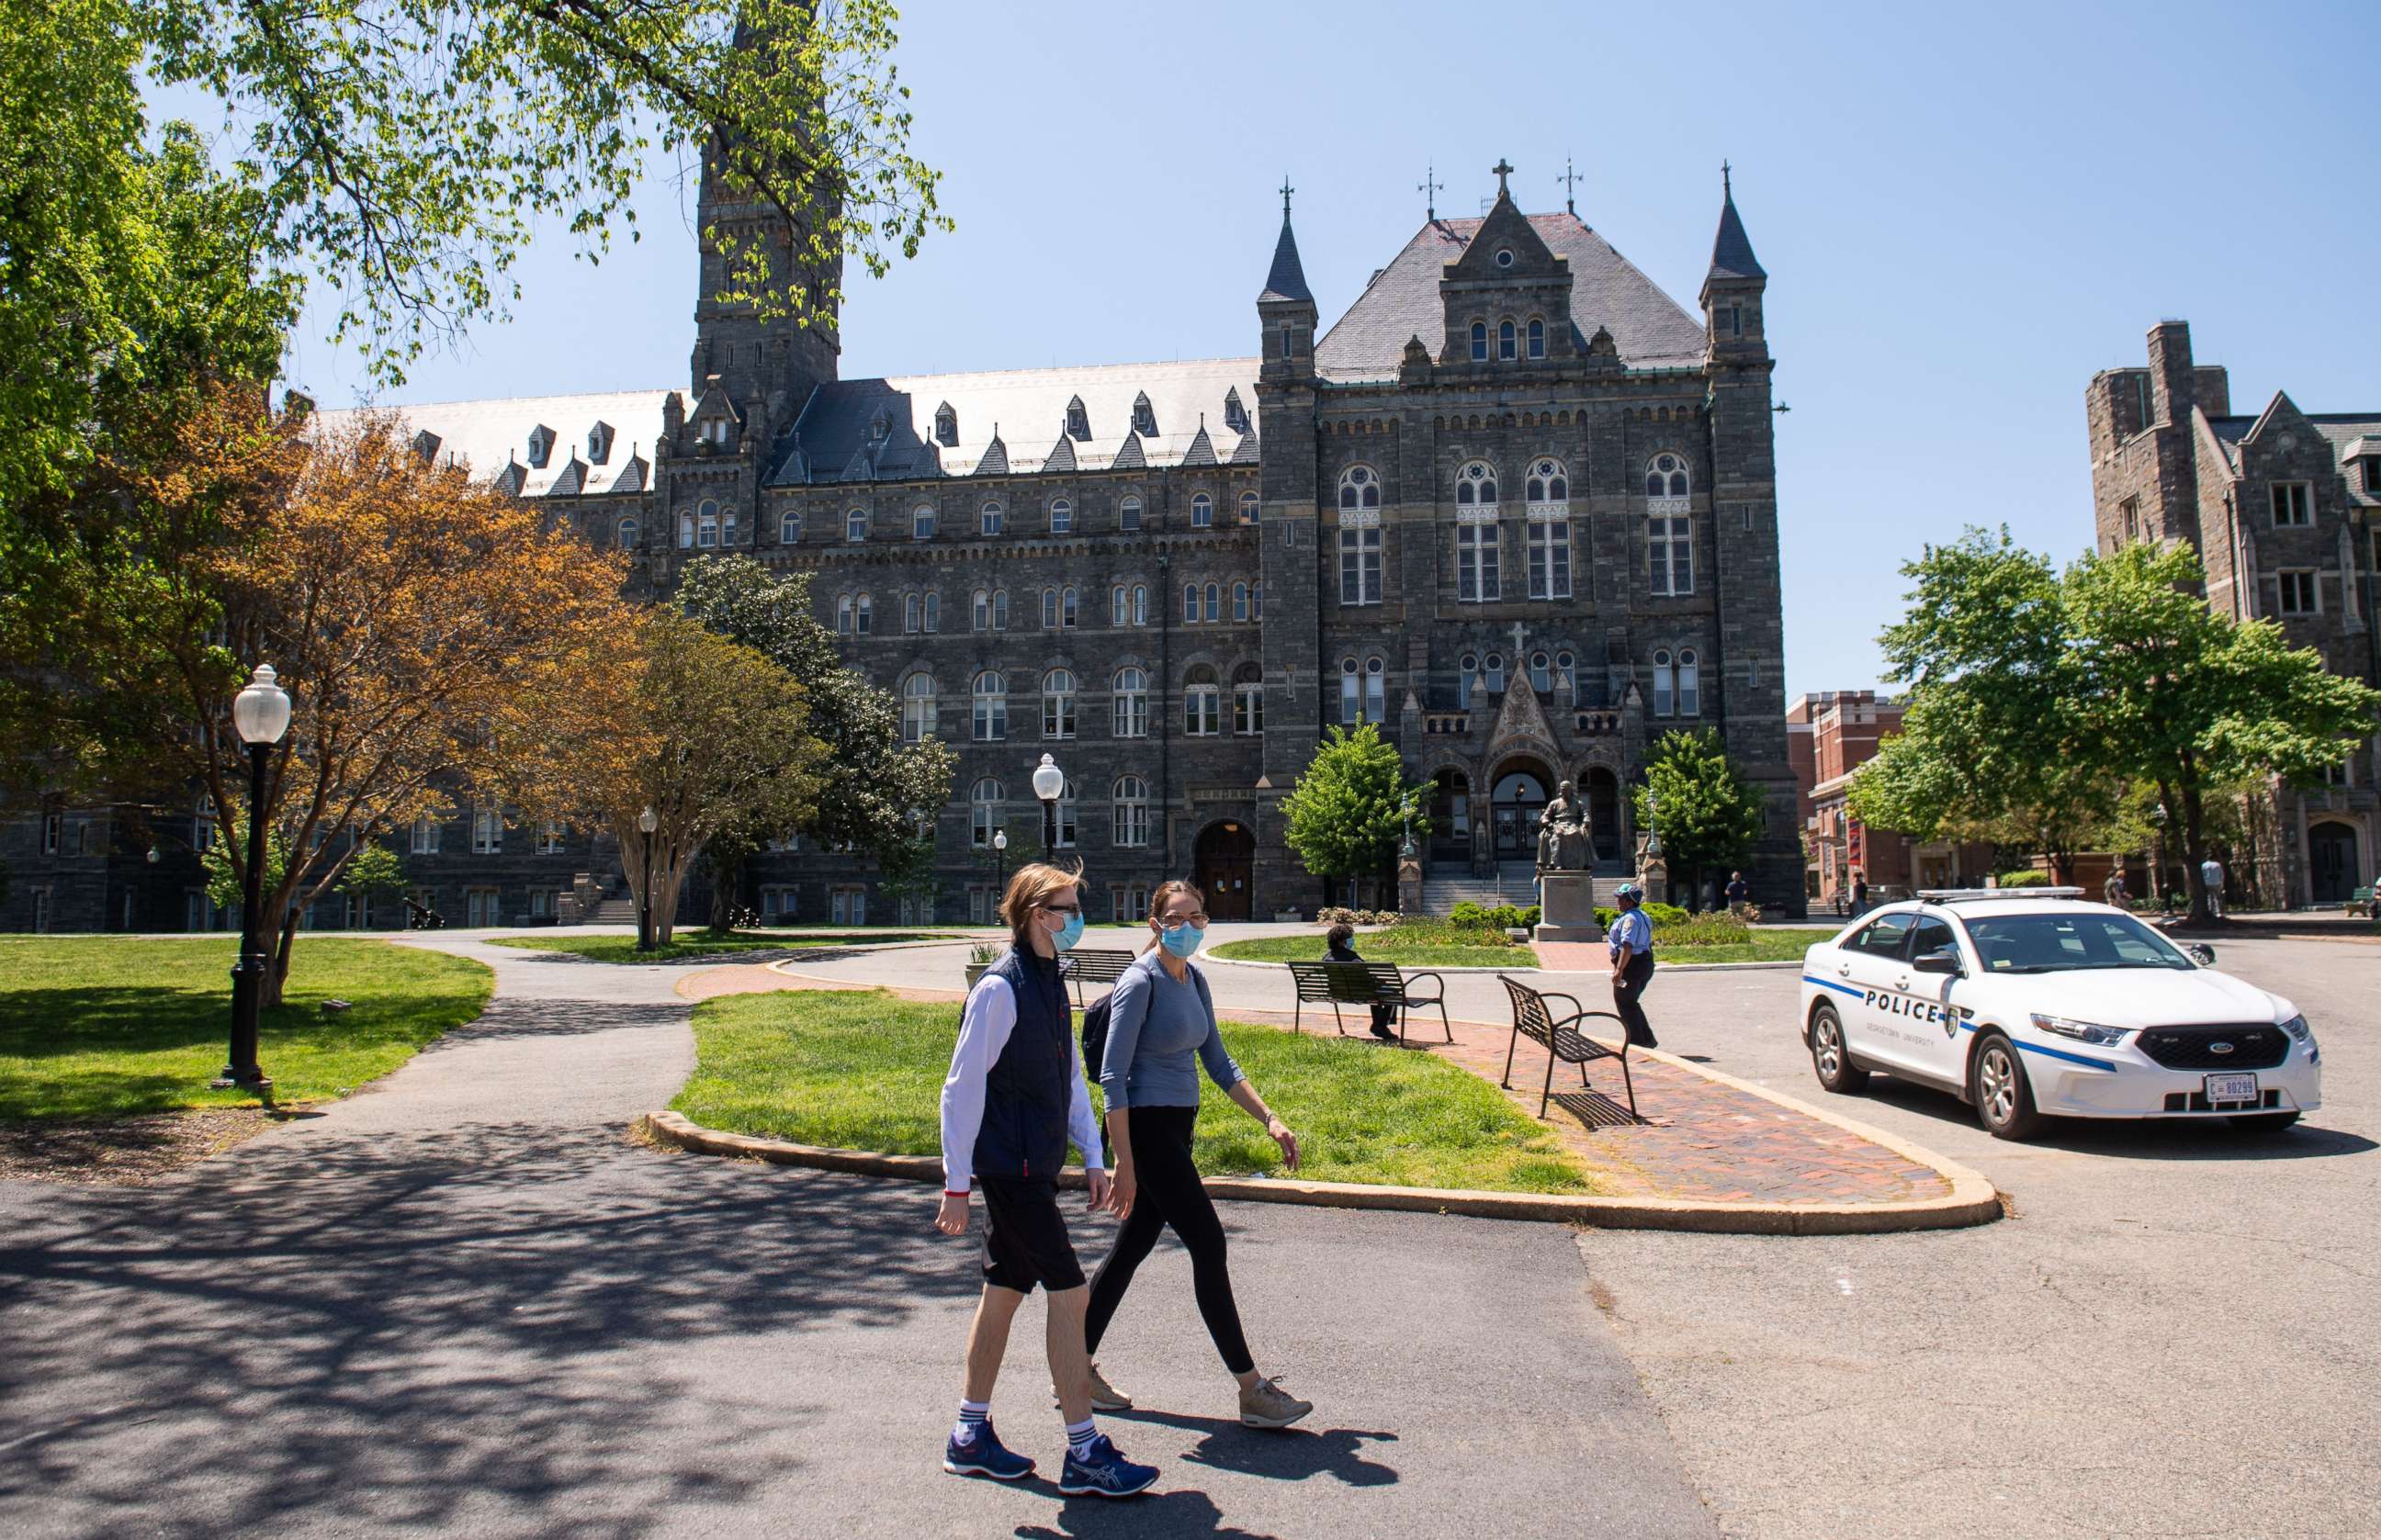 PHOTO: The campus of Georgetown University is seen nearly empty as classes were canceled due to the coronavirus pandemic, in Washington, May 7, 2020